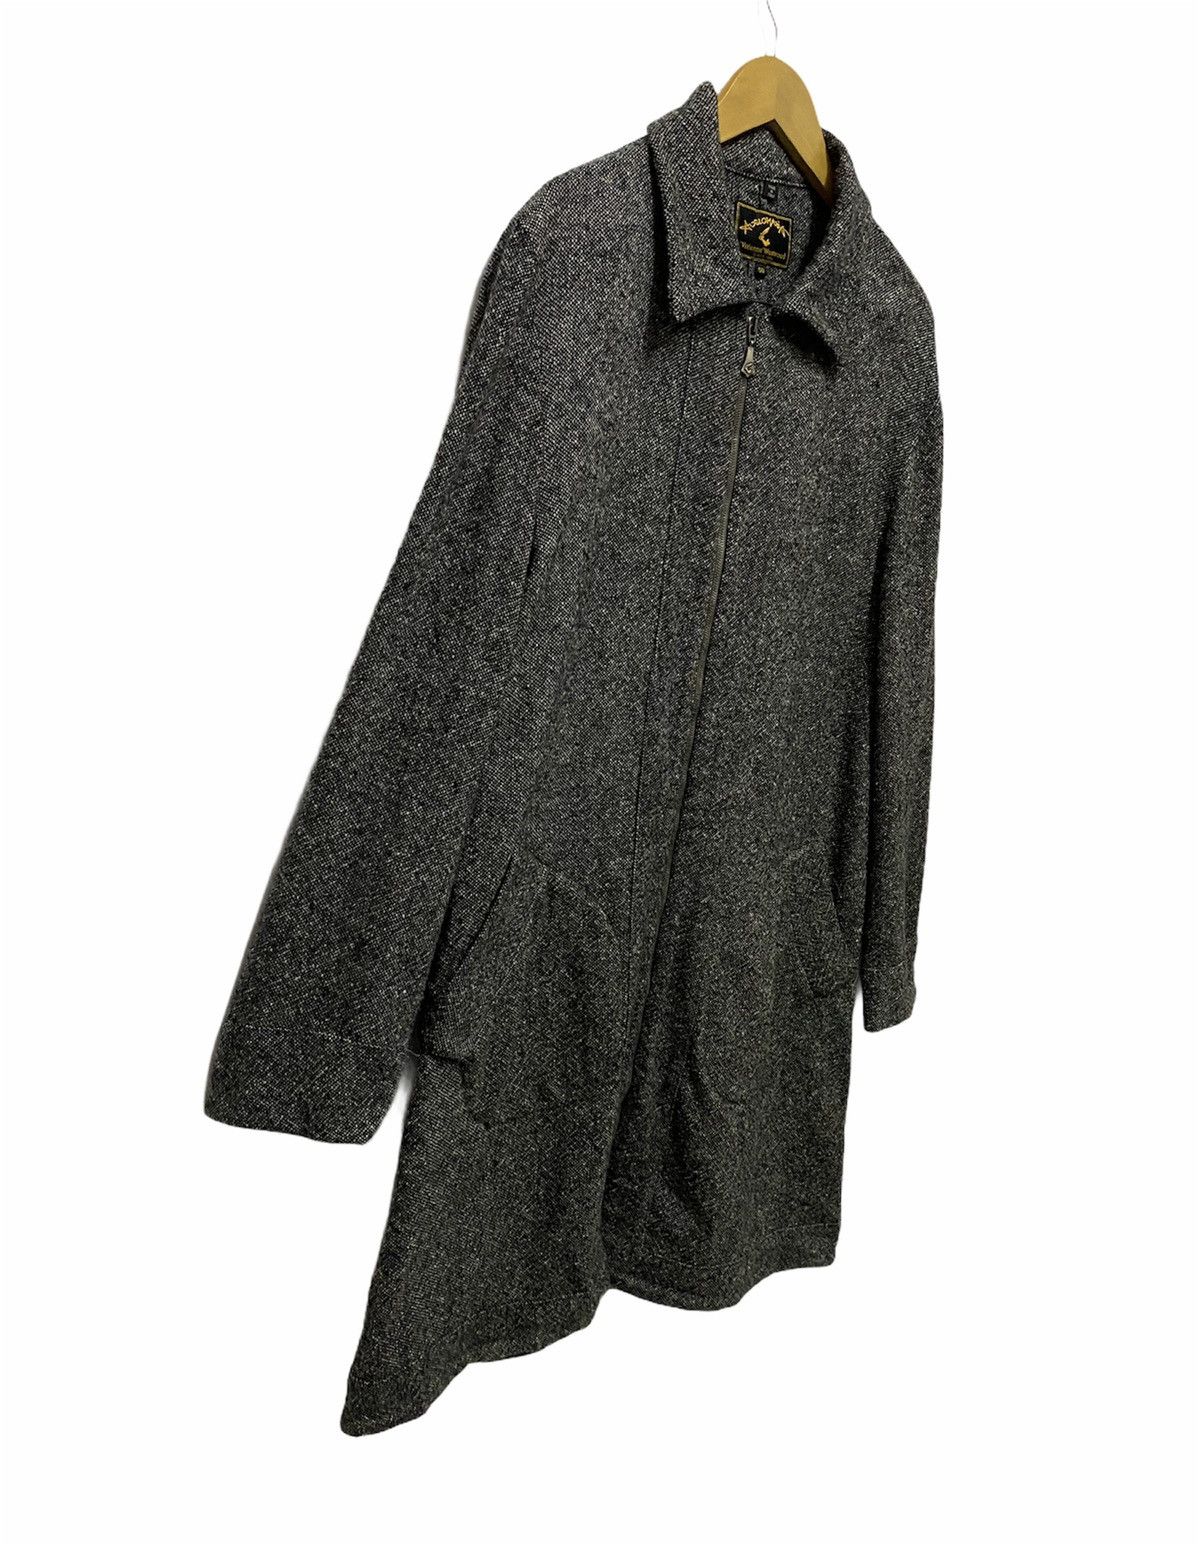 Vivienne Westwood Anglomania Wool Long Jacket Made in Italy - 3